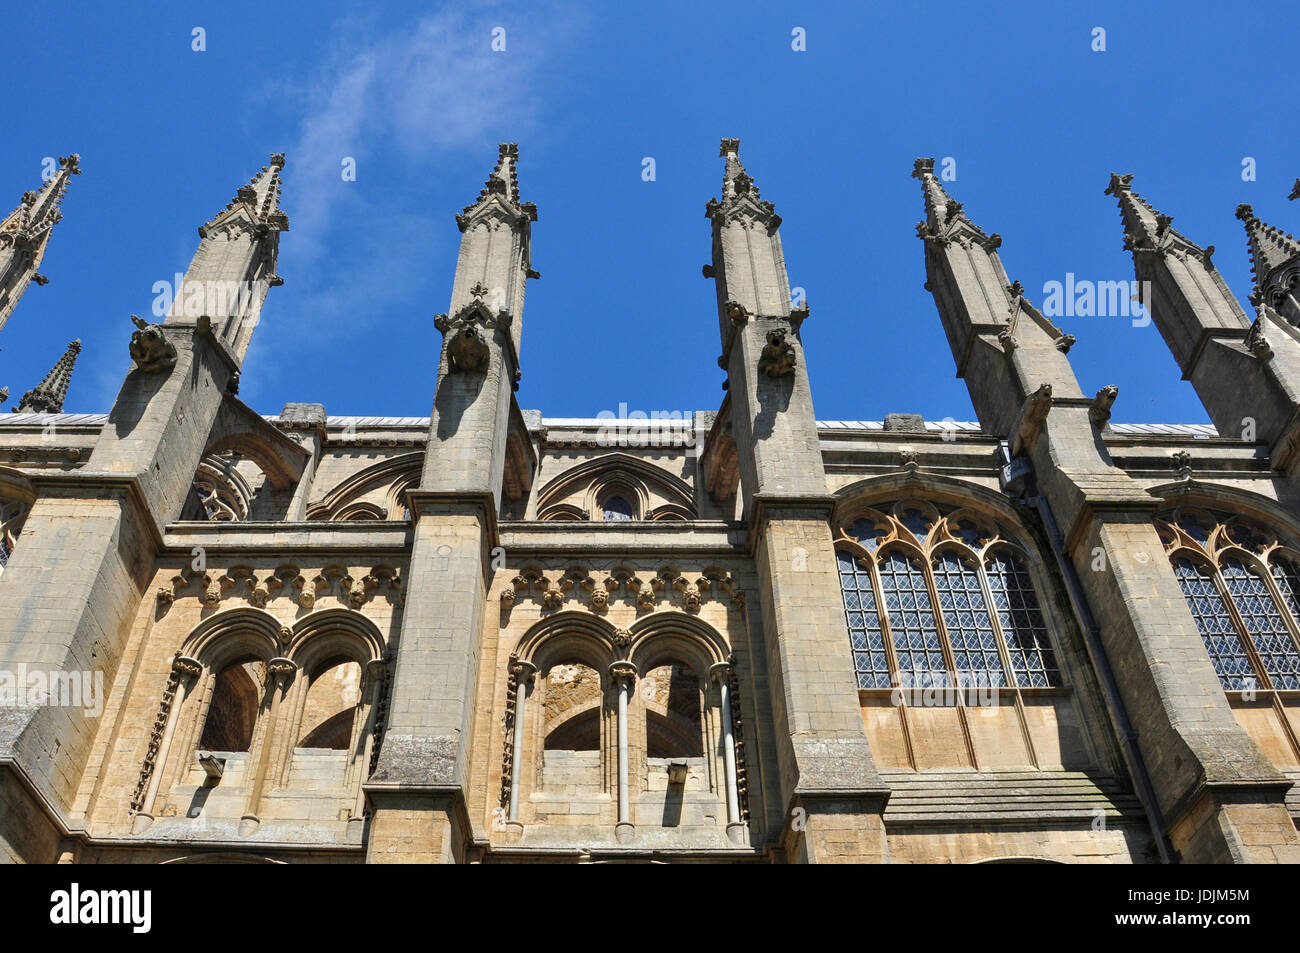 Architectural spires on the side of Ely Cathedral, Cambridgeshire, England, UK Stock Photo